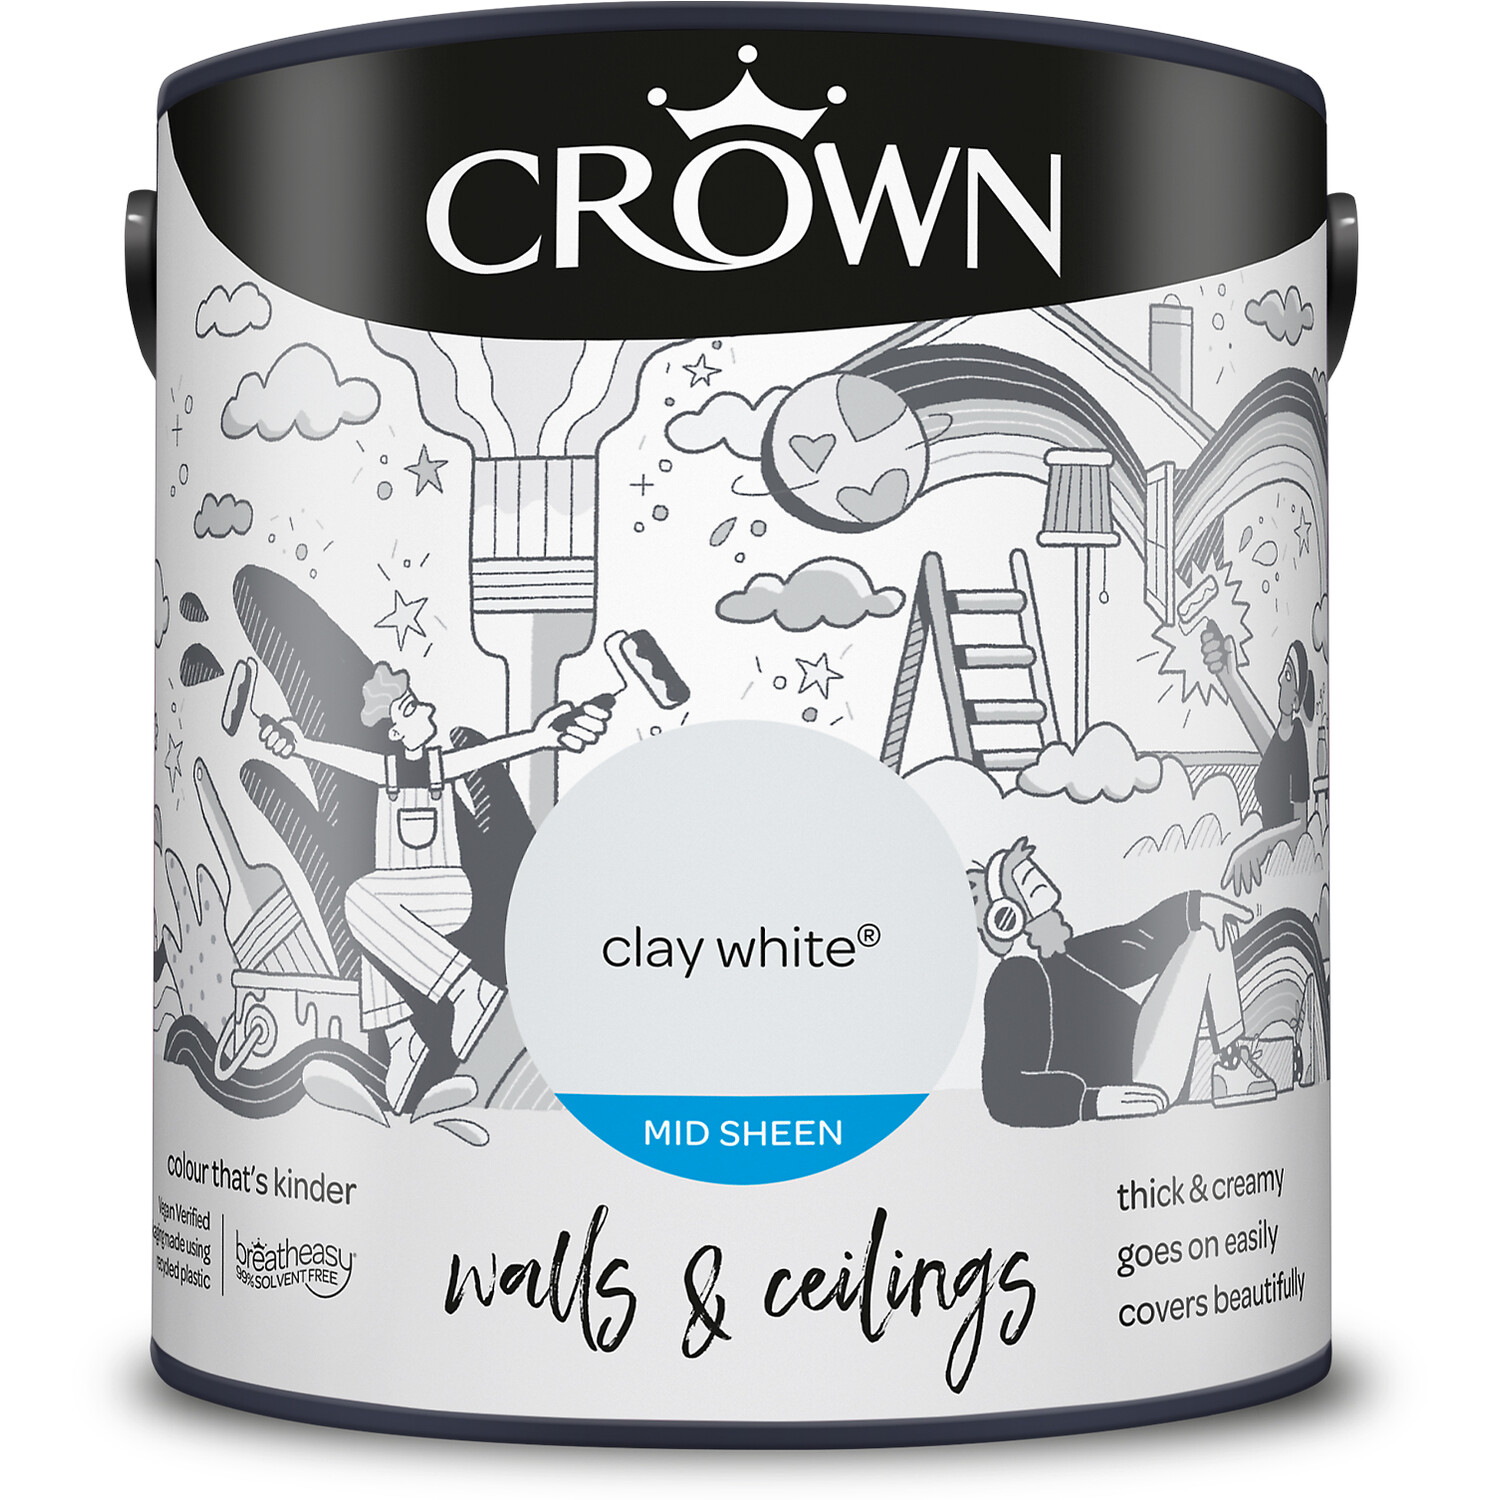 Crown Walls & Ceilings Clay White Mid Sheen Emulsion Paint 2.5L Image 2